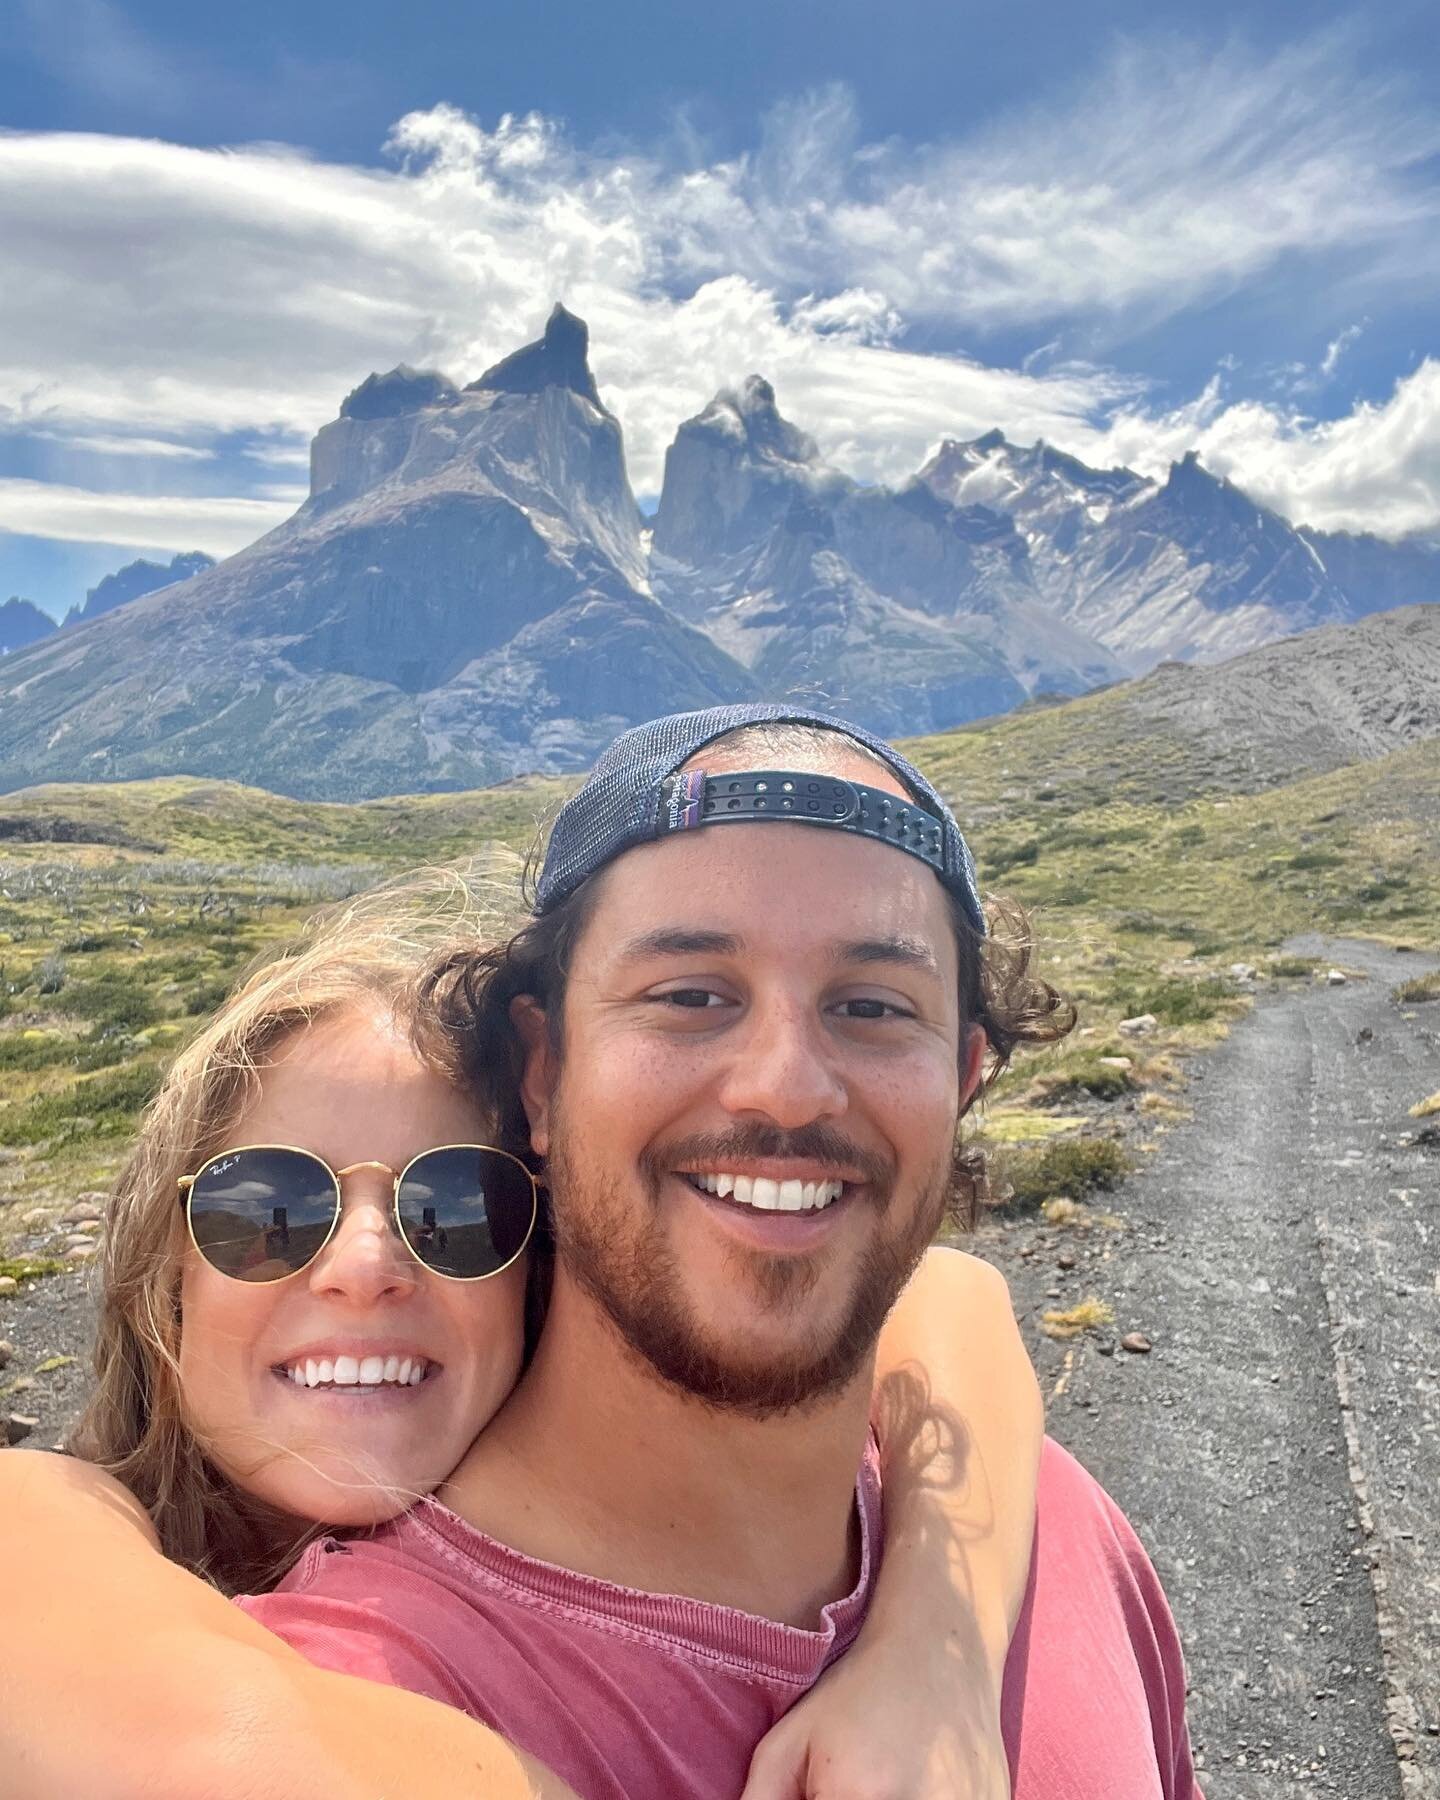 Torres del Paine! After almost two weeks stranded without the Land Cruiser (more on that later), it felt so good to get back on the road again to explore this stunning national park in southern Chile. It&rsquo;s hard to describe the beauty in words. 